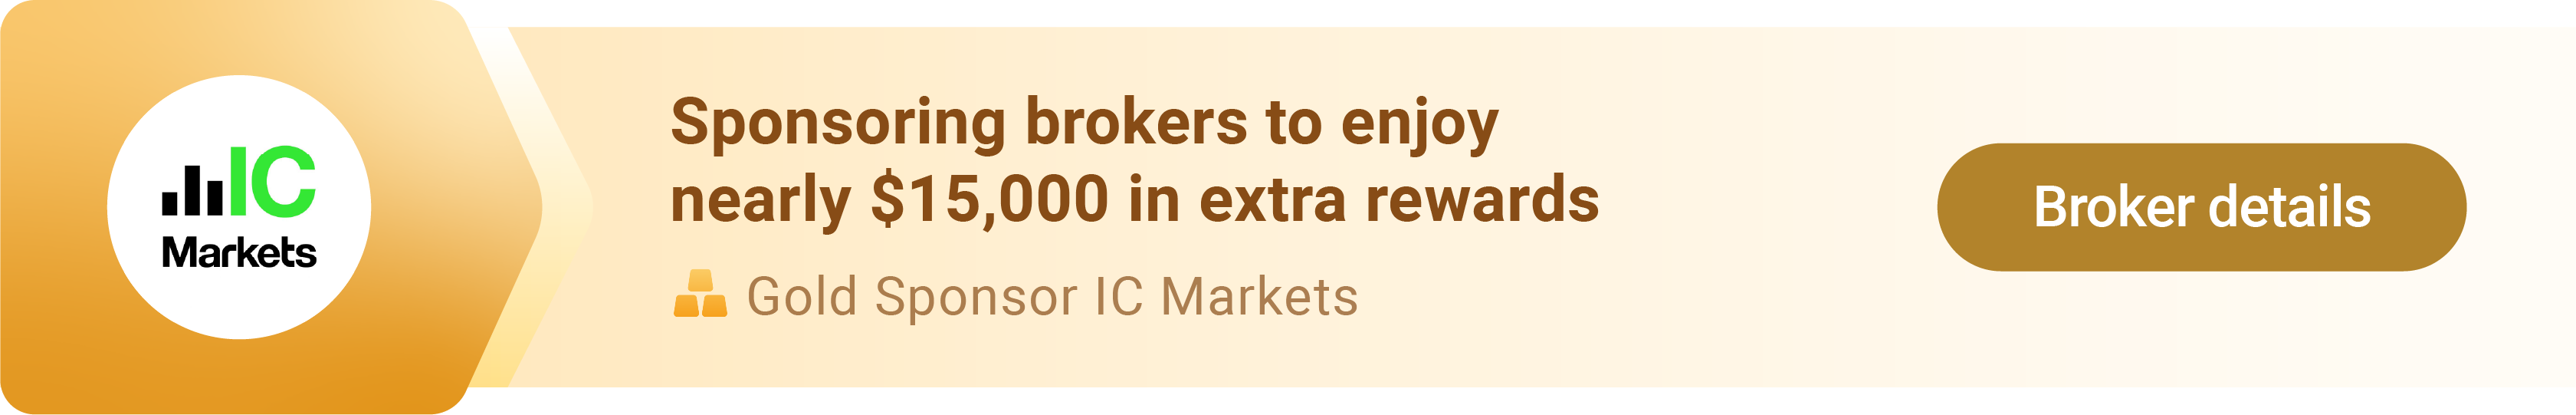 Sponsorship | IC Markets is coming with a surprise!